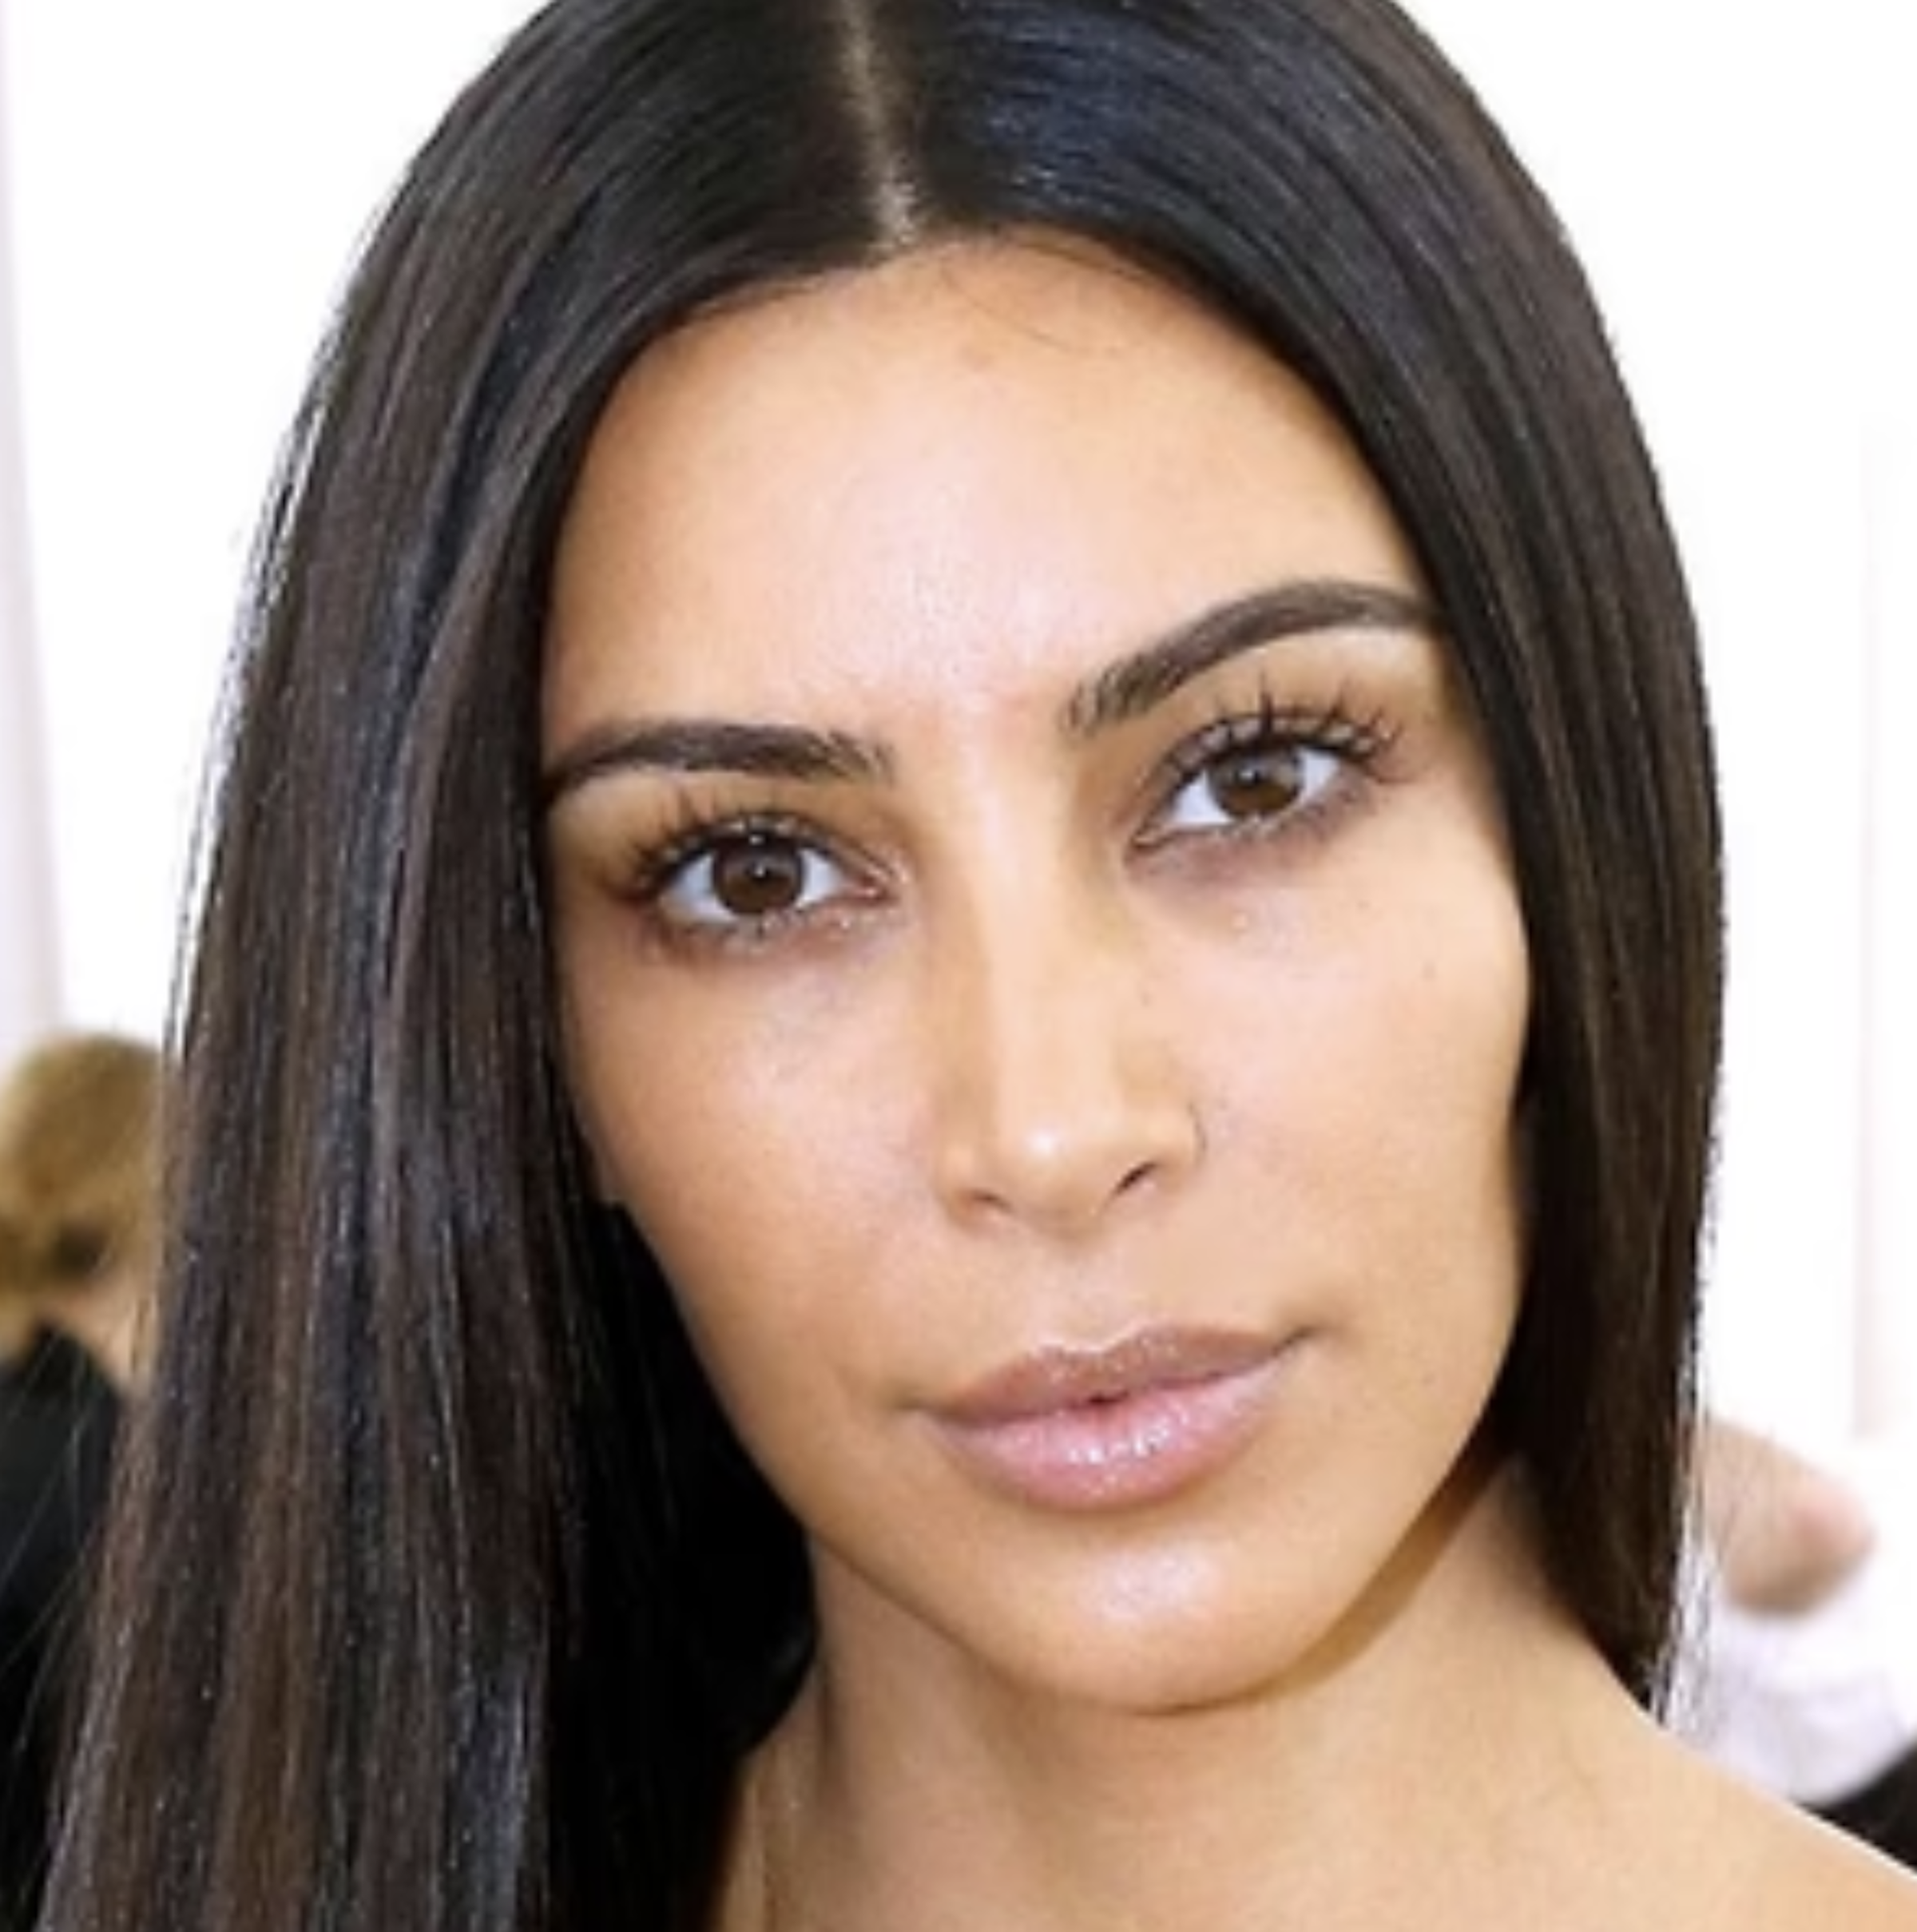 Kim Kardashian is also an avid user. Photo provided by CurrentBody.